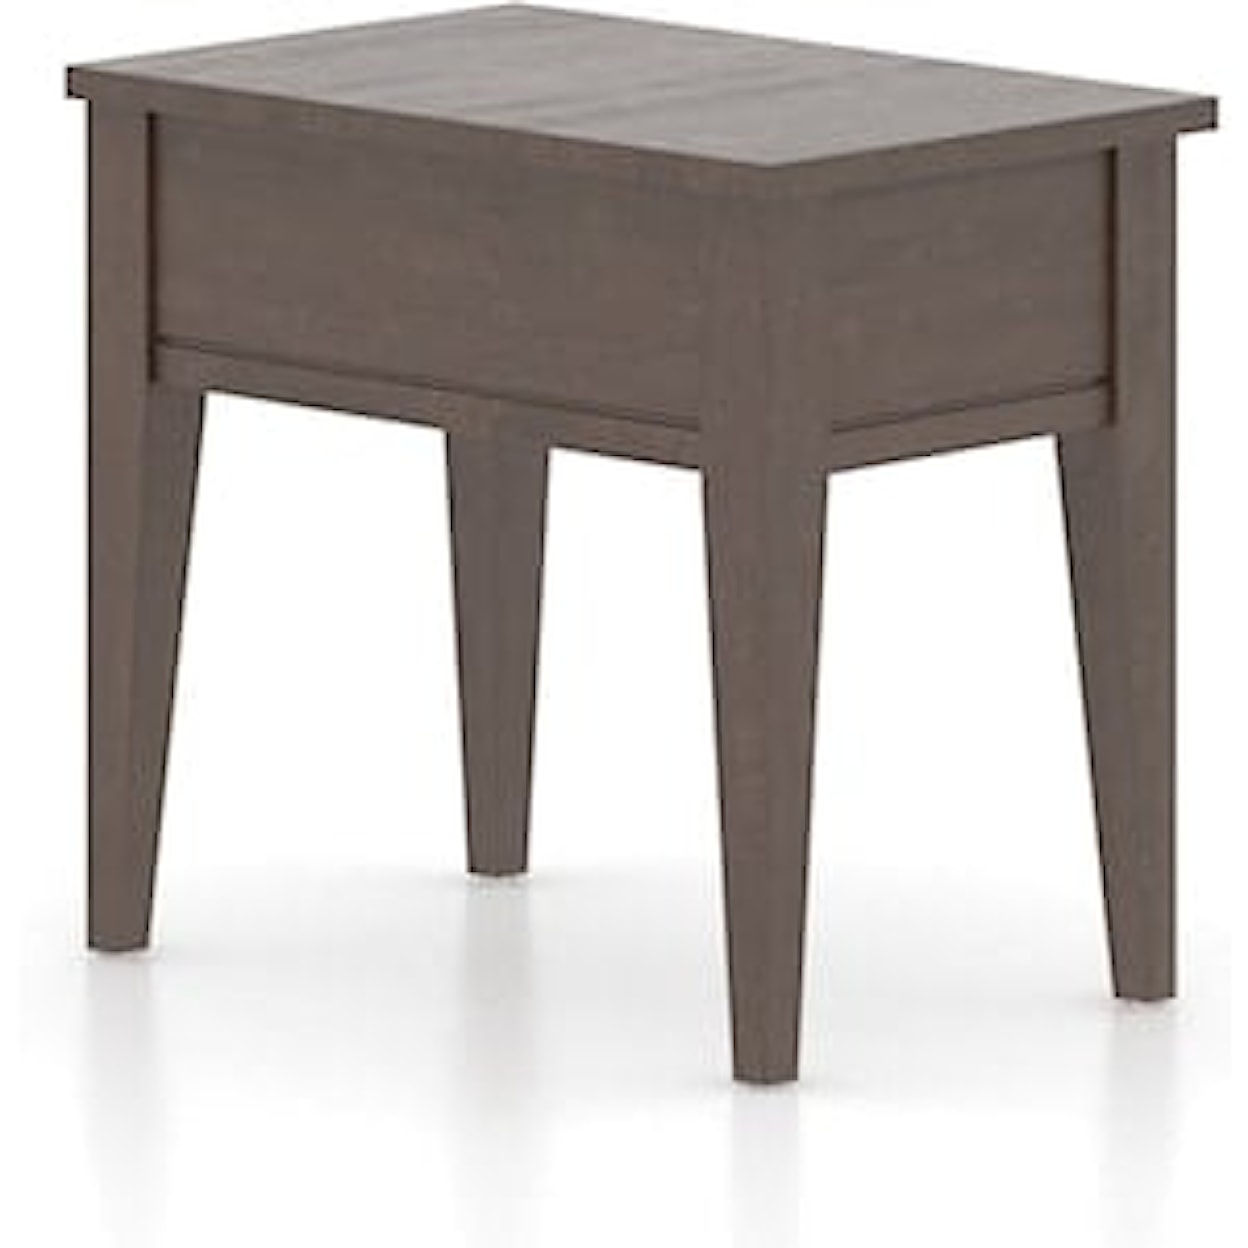 Canadel Accent Harmony Rectangular End Table